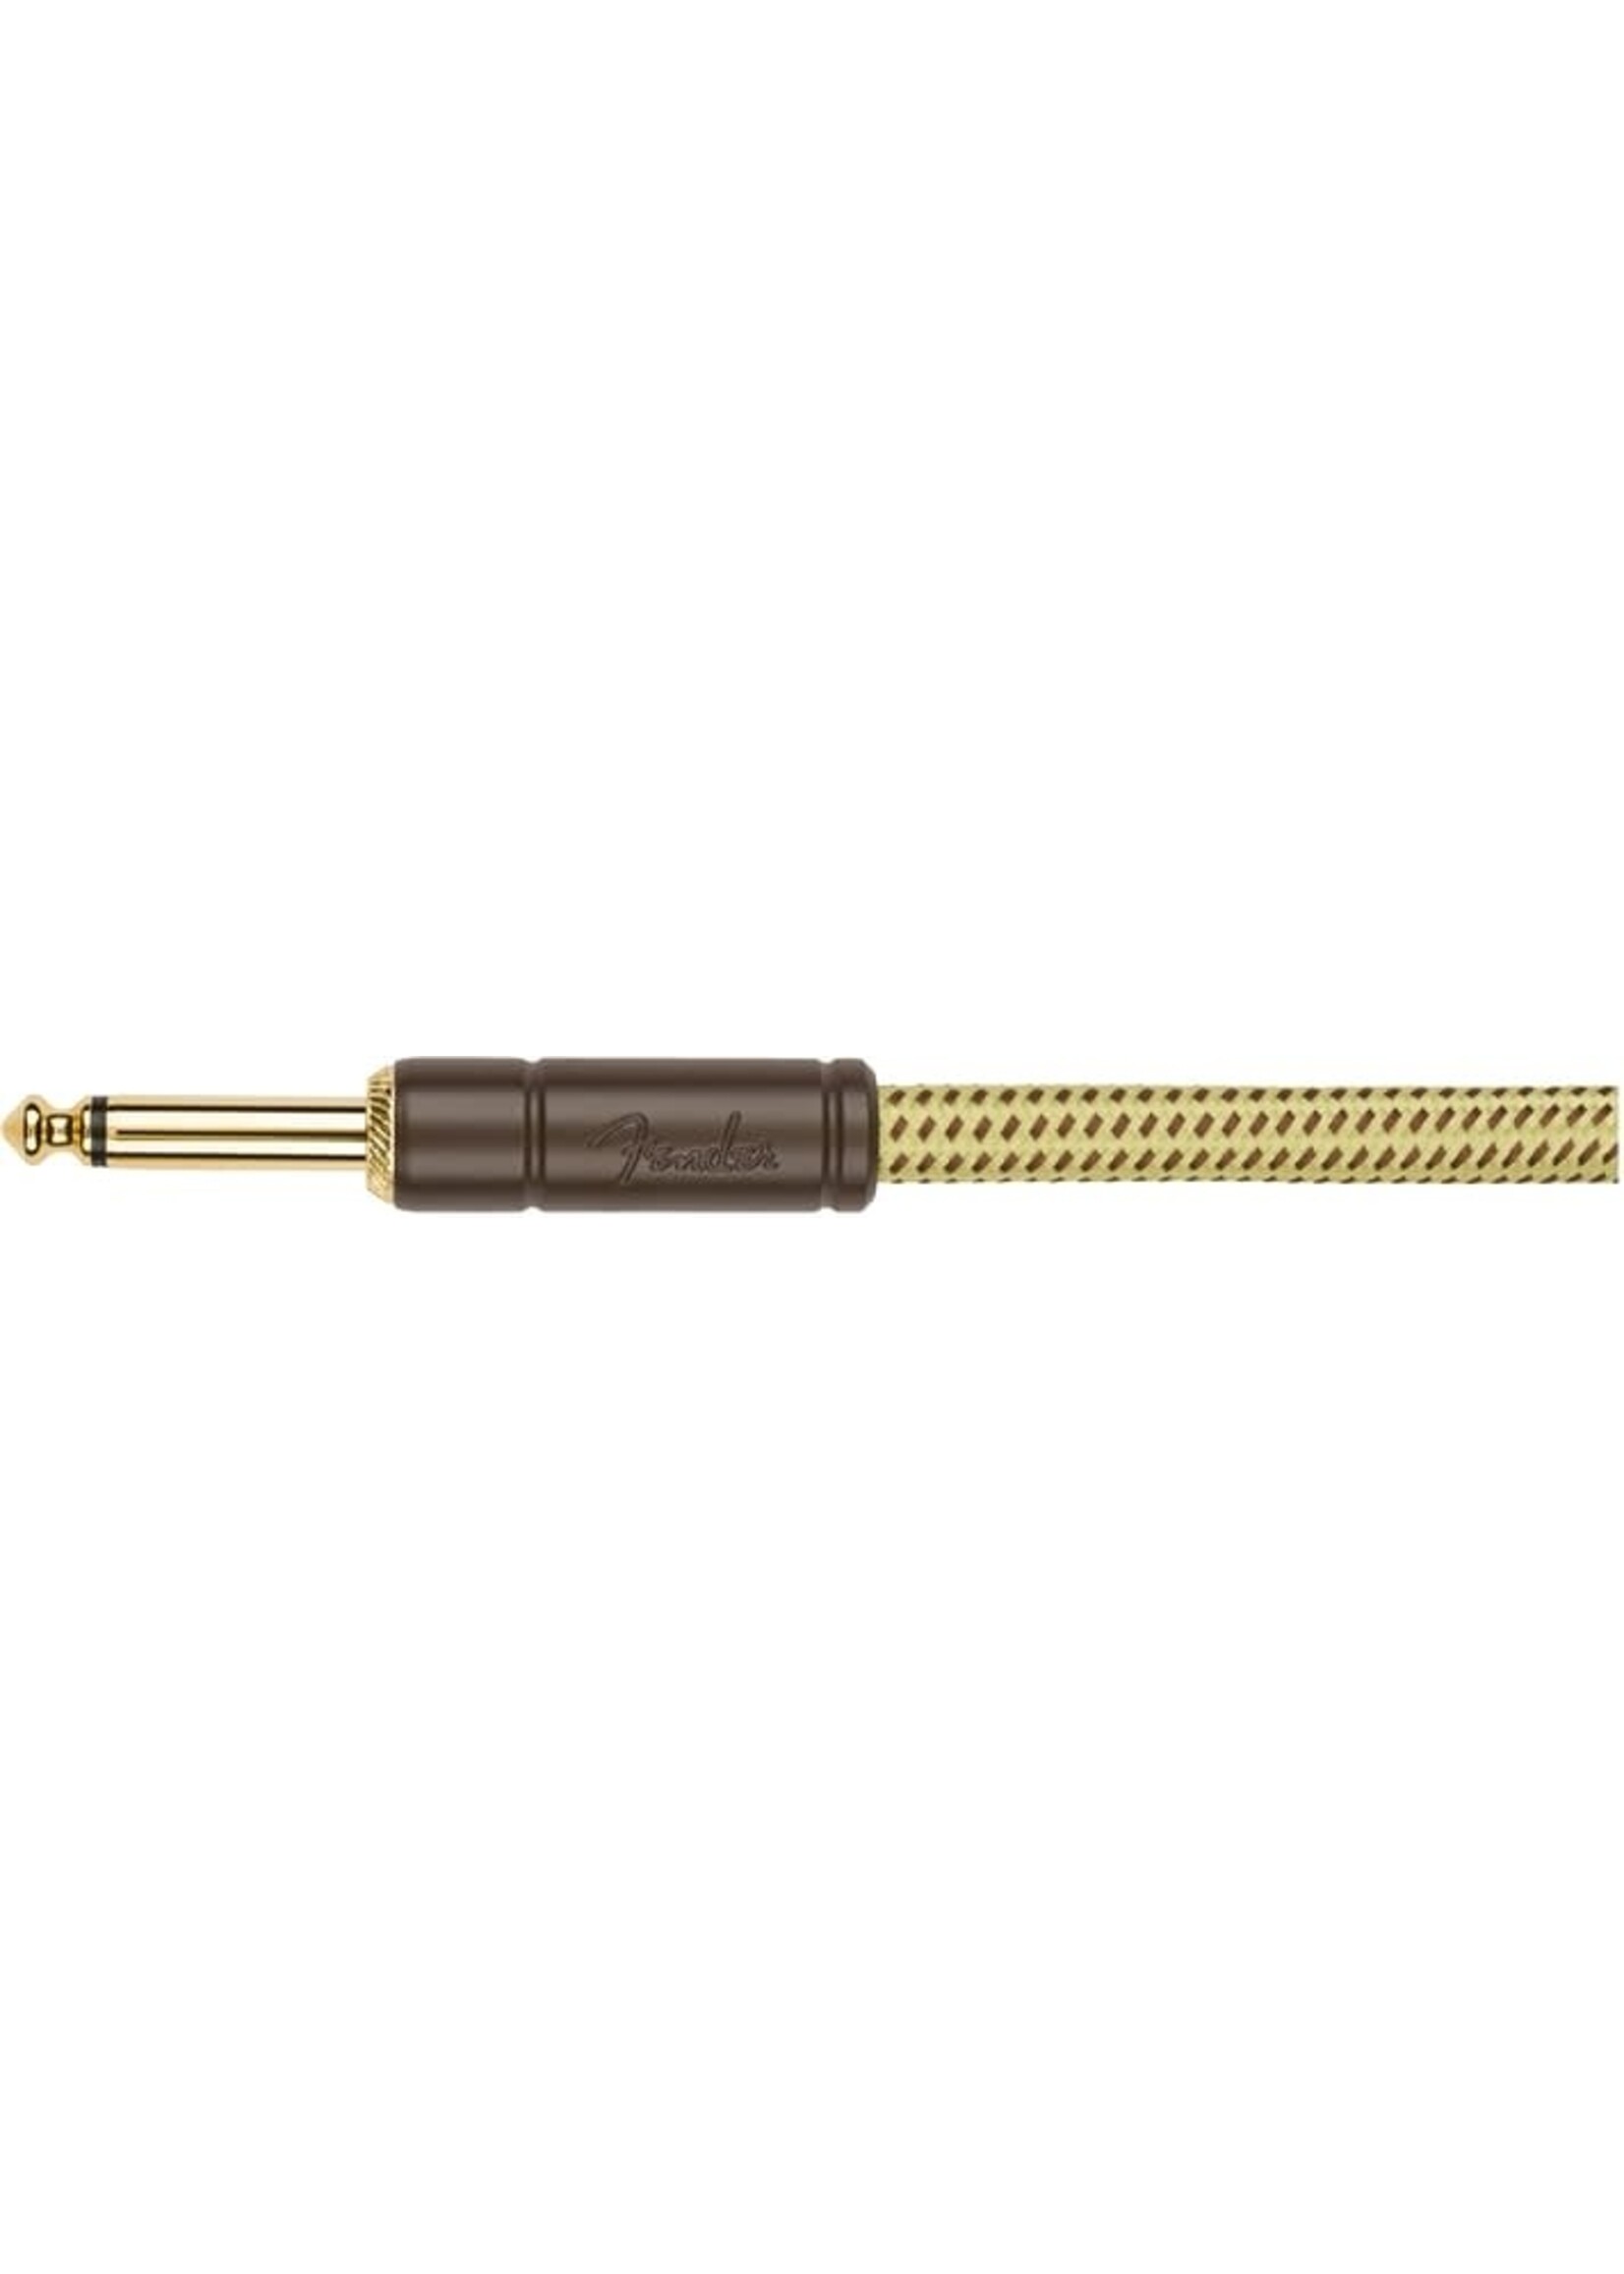 Fender Fender Deluxe Coil Cable, 30', Tweed